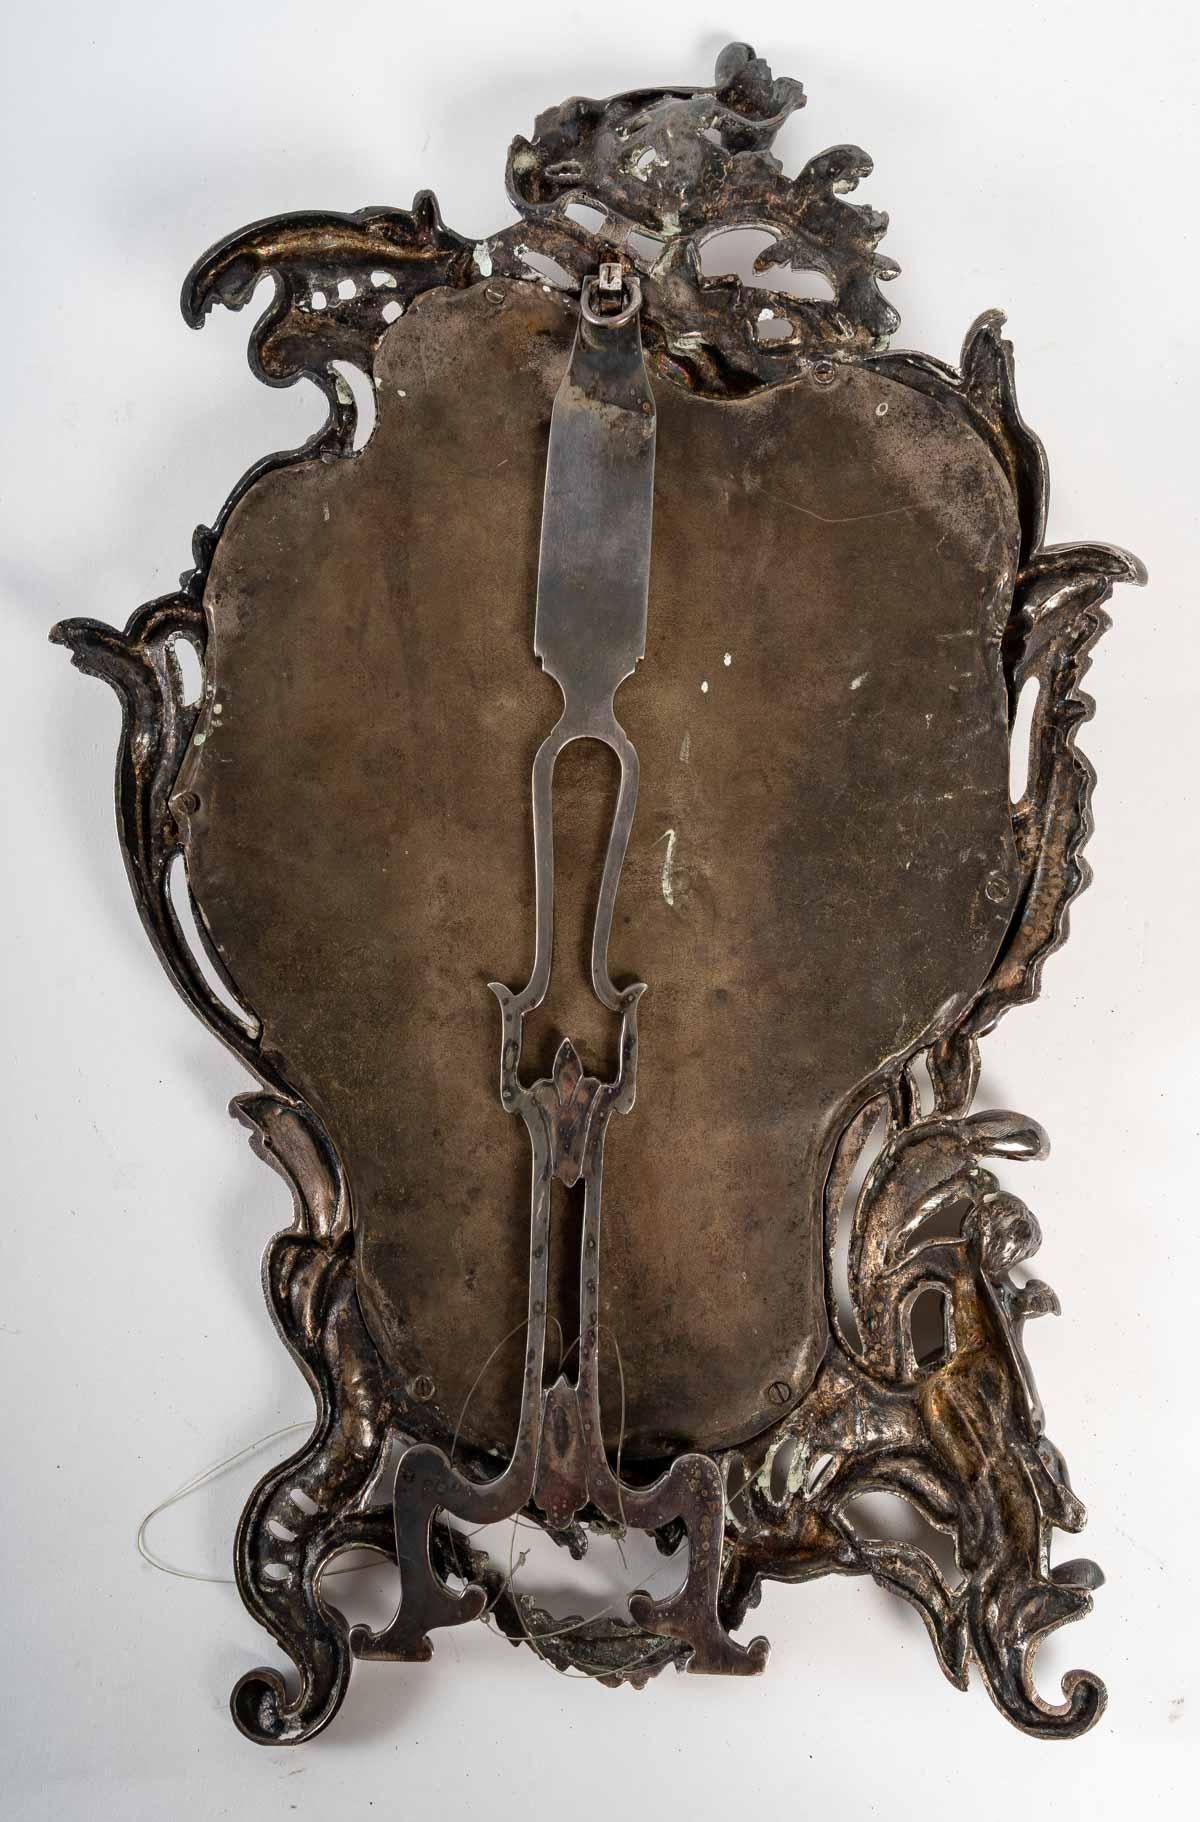 A silver plated bronze table mirror, 19th century
A silvered bronze table mirror with mercury glass, 19th century, Napoleon III period.
Measures: H: 50 cm, W: 31 cm, D: 3 cm.